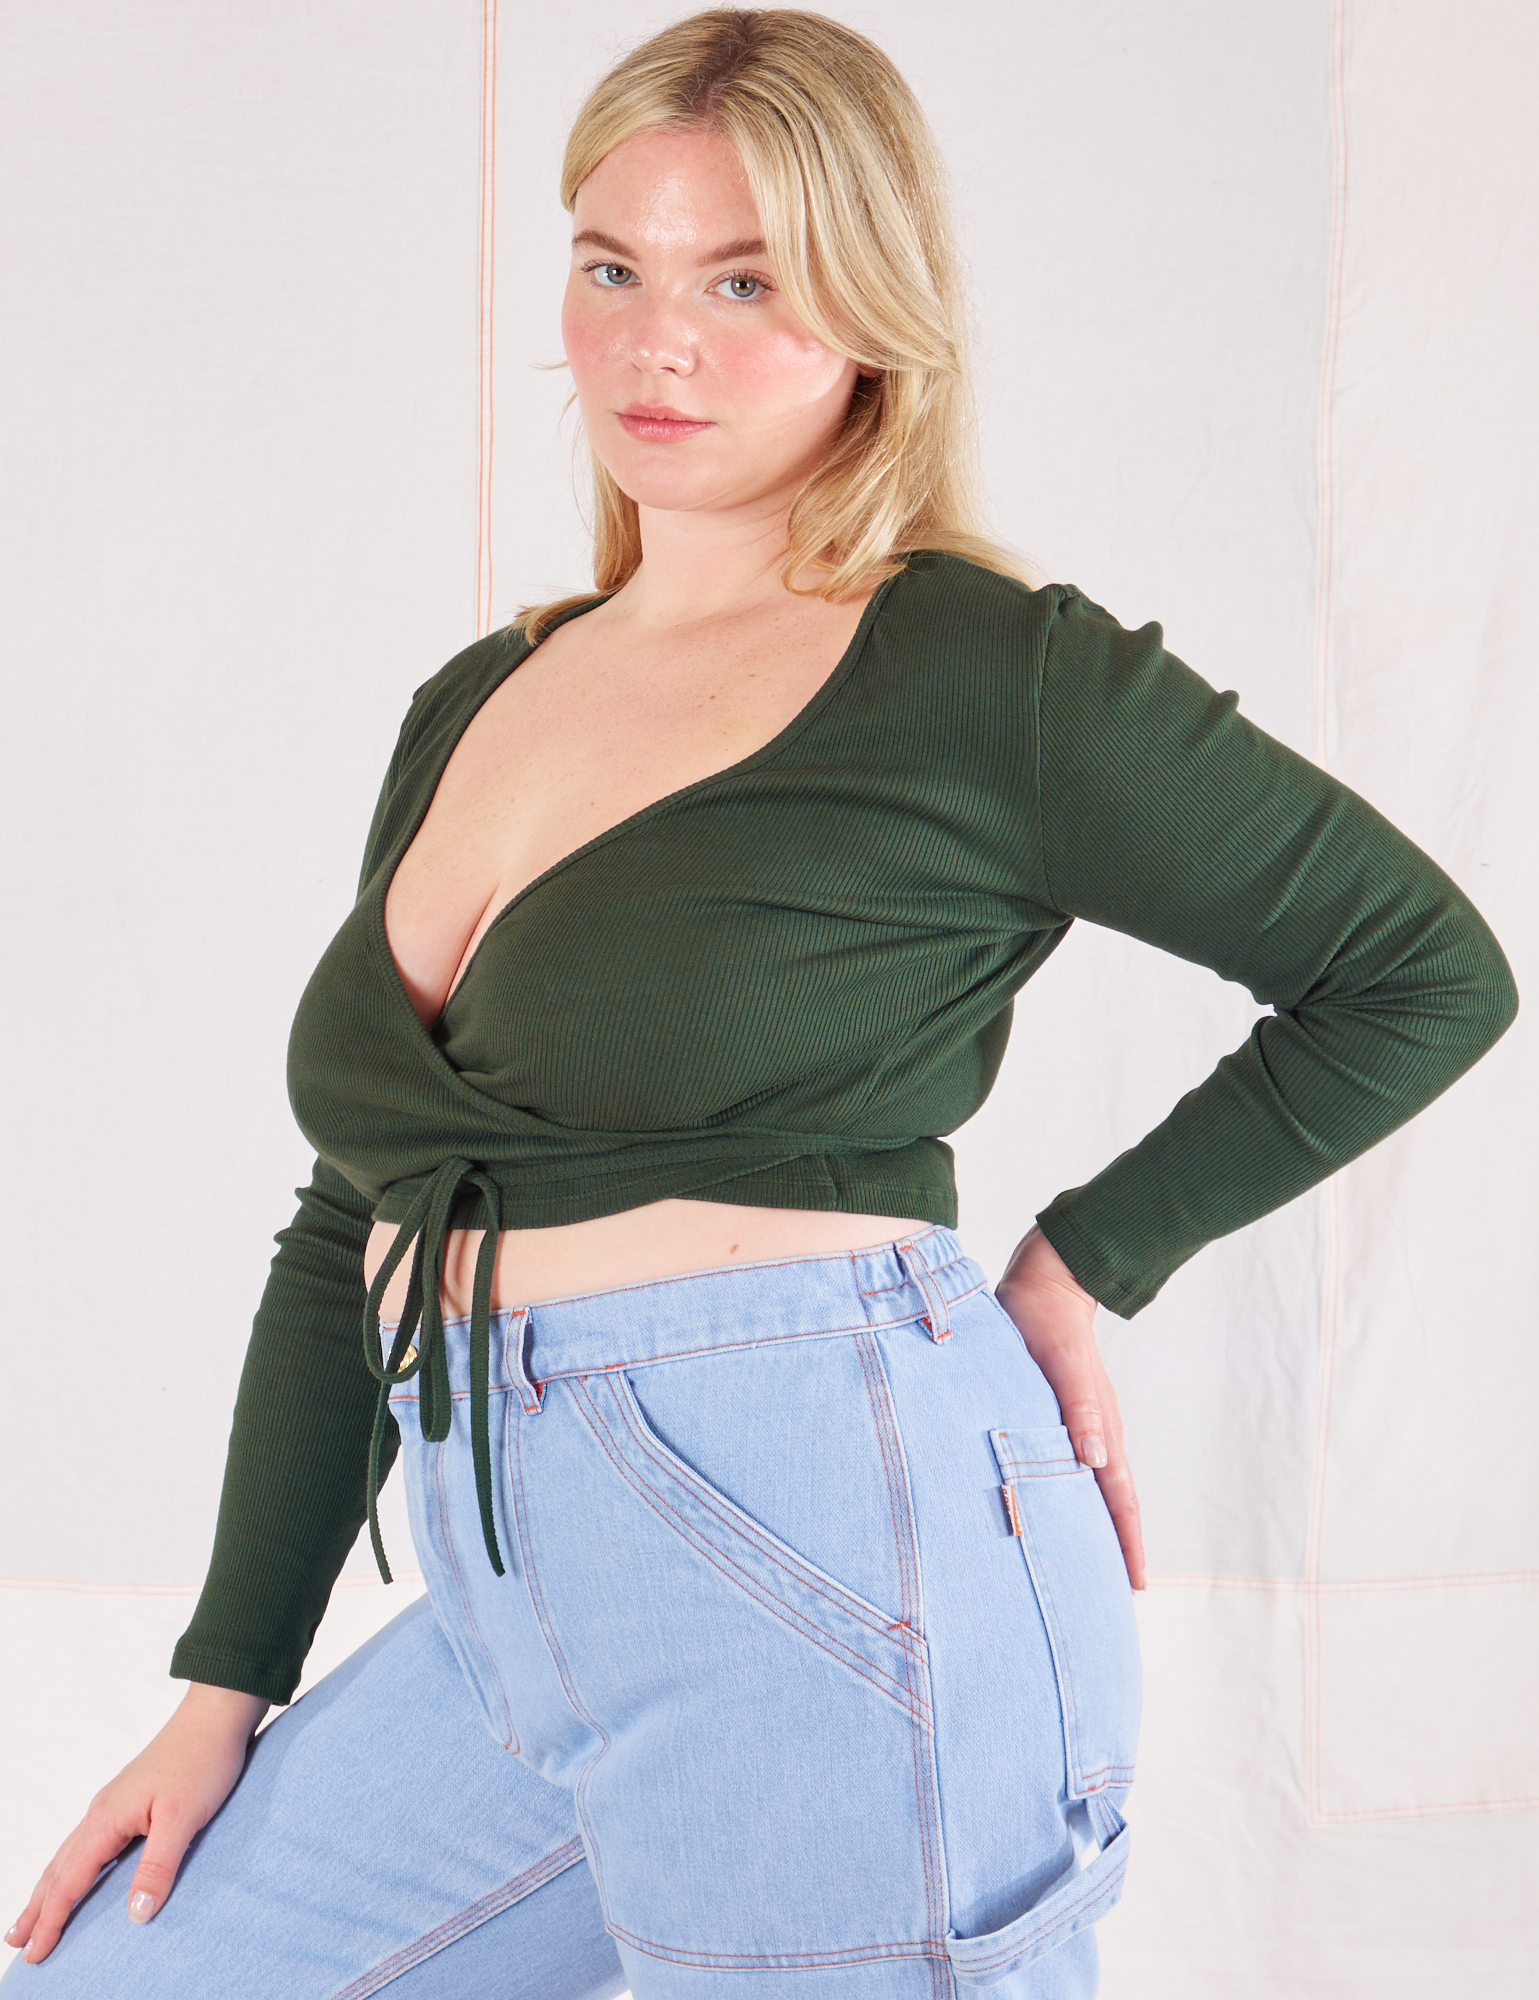 Wrap Top in Swamp Green angled front view on Lish